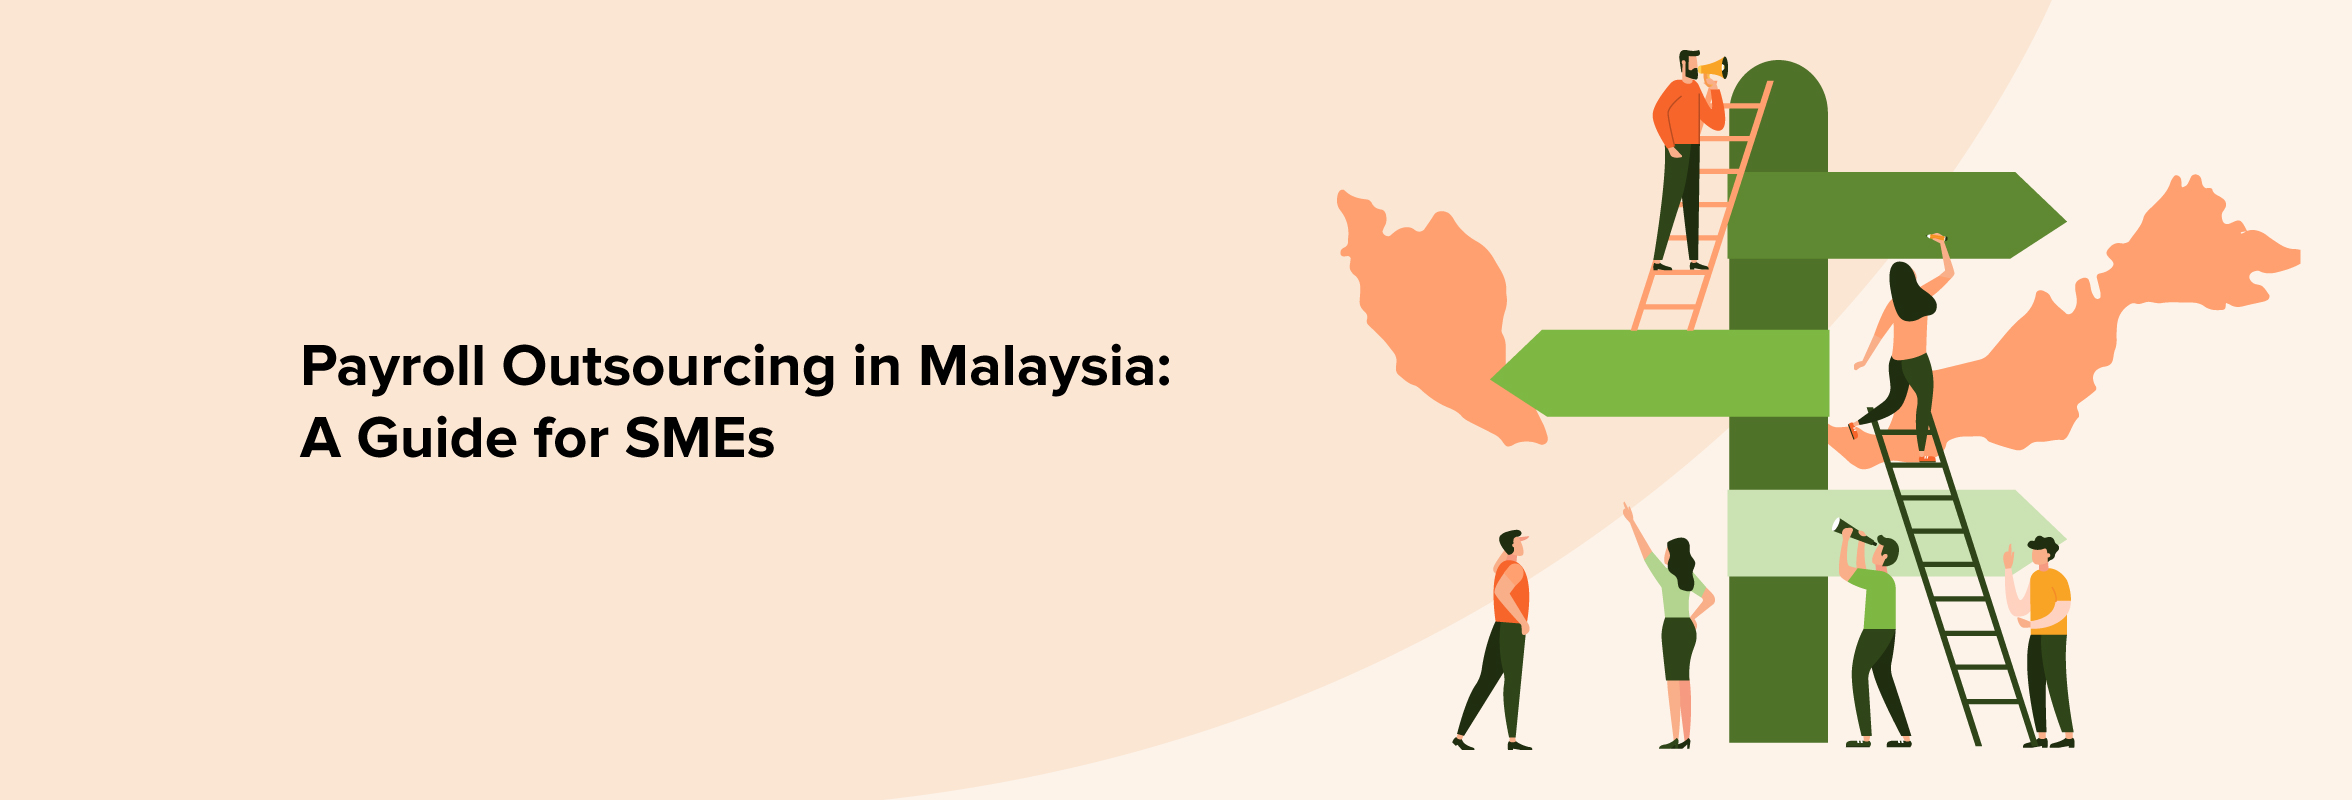 Payroll Outsourcing in Malaysia A Guide for SMEs